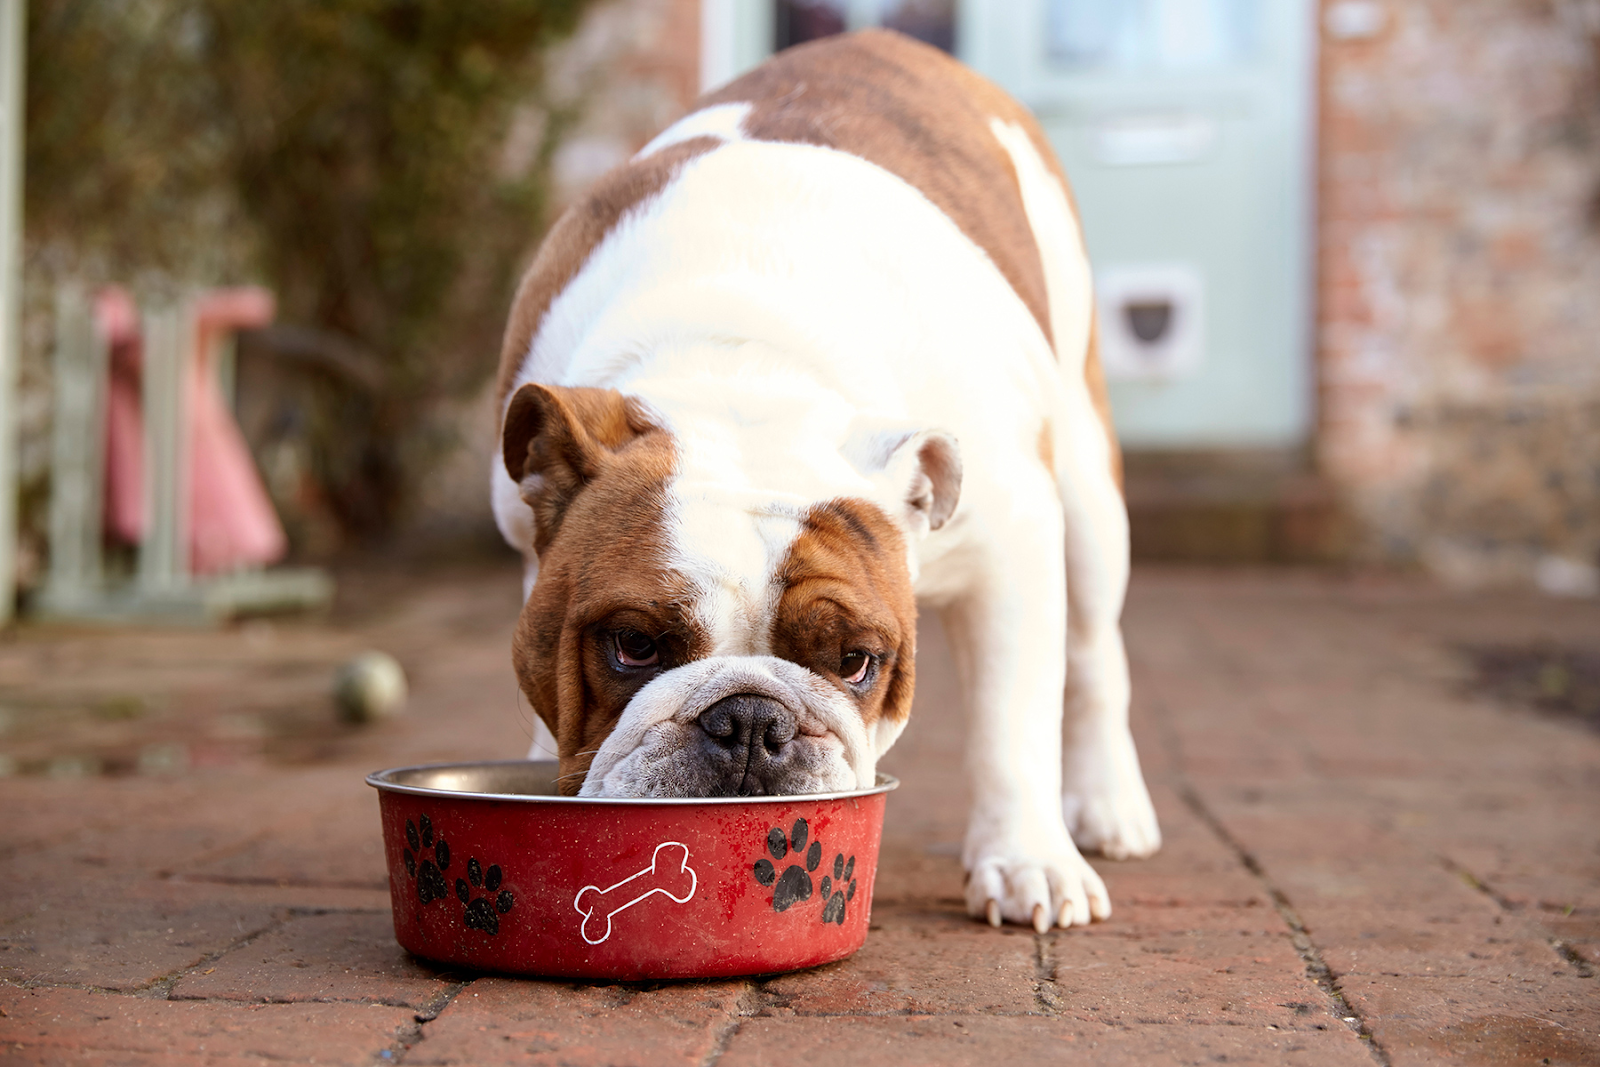 Can Dogs Eat SPAM? Is SPAM safe for Dogs to Eat?